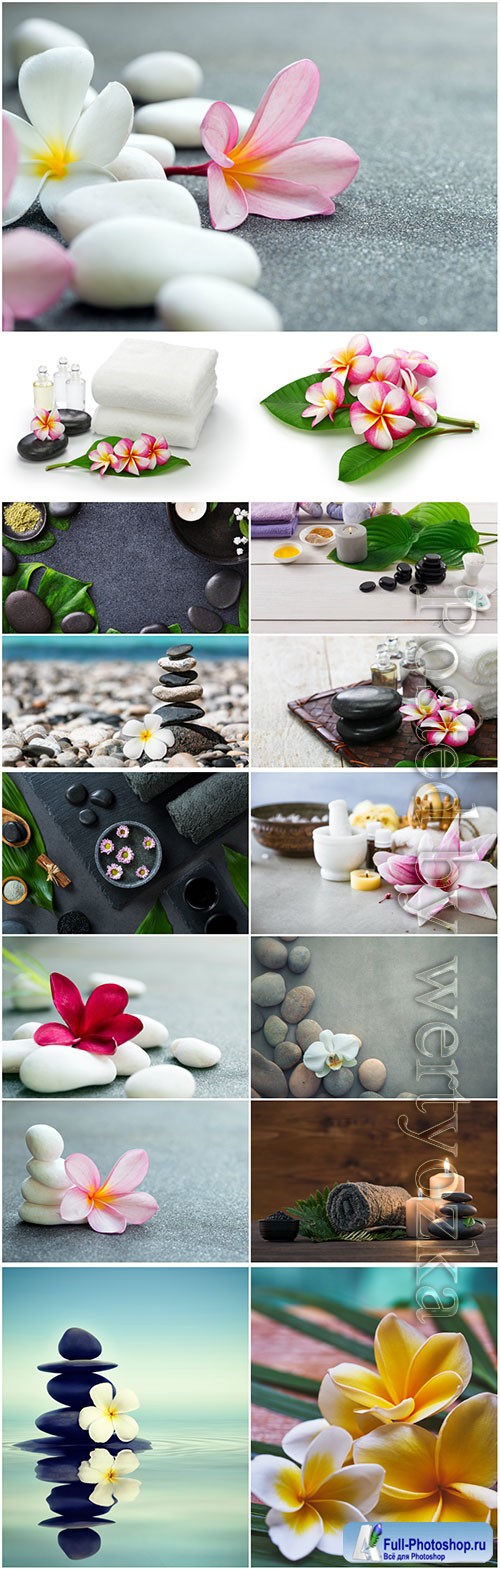 Spa backgrounds, compositions beautiful stock photo